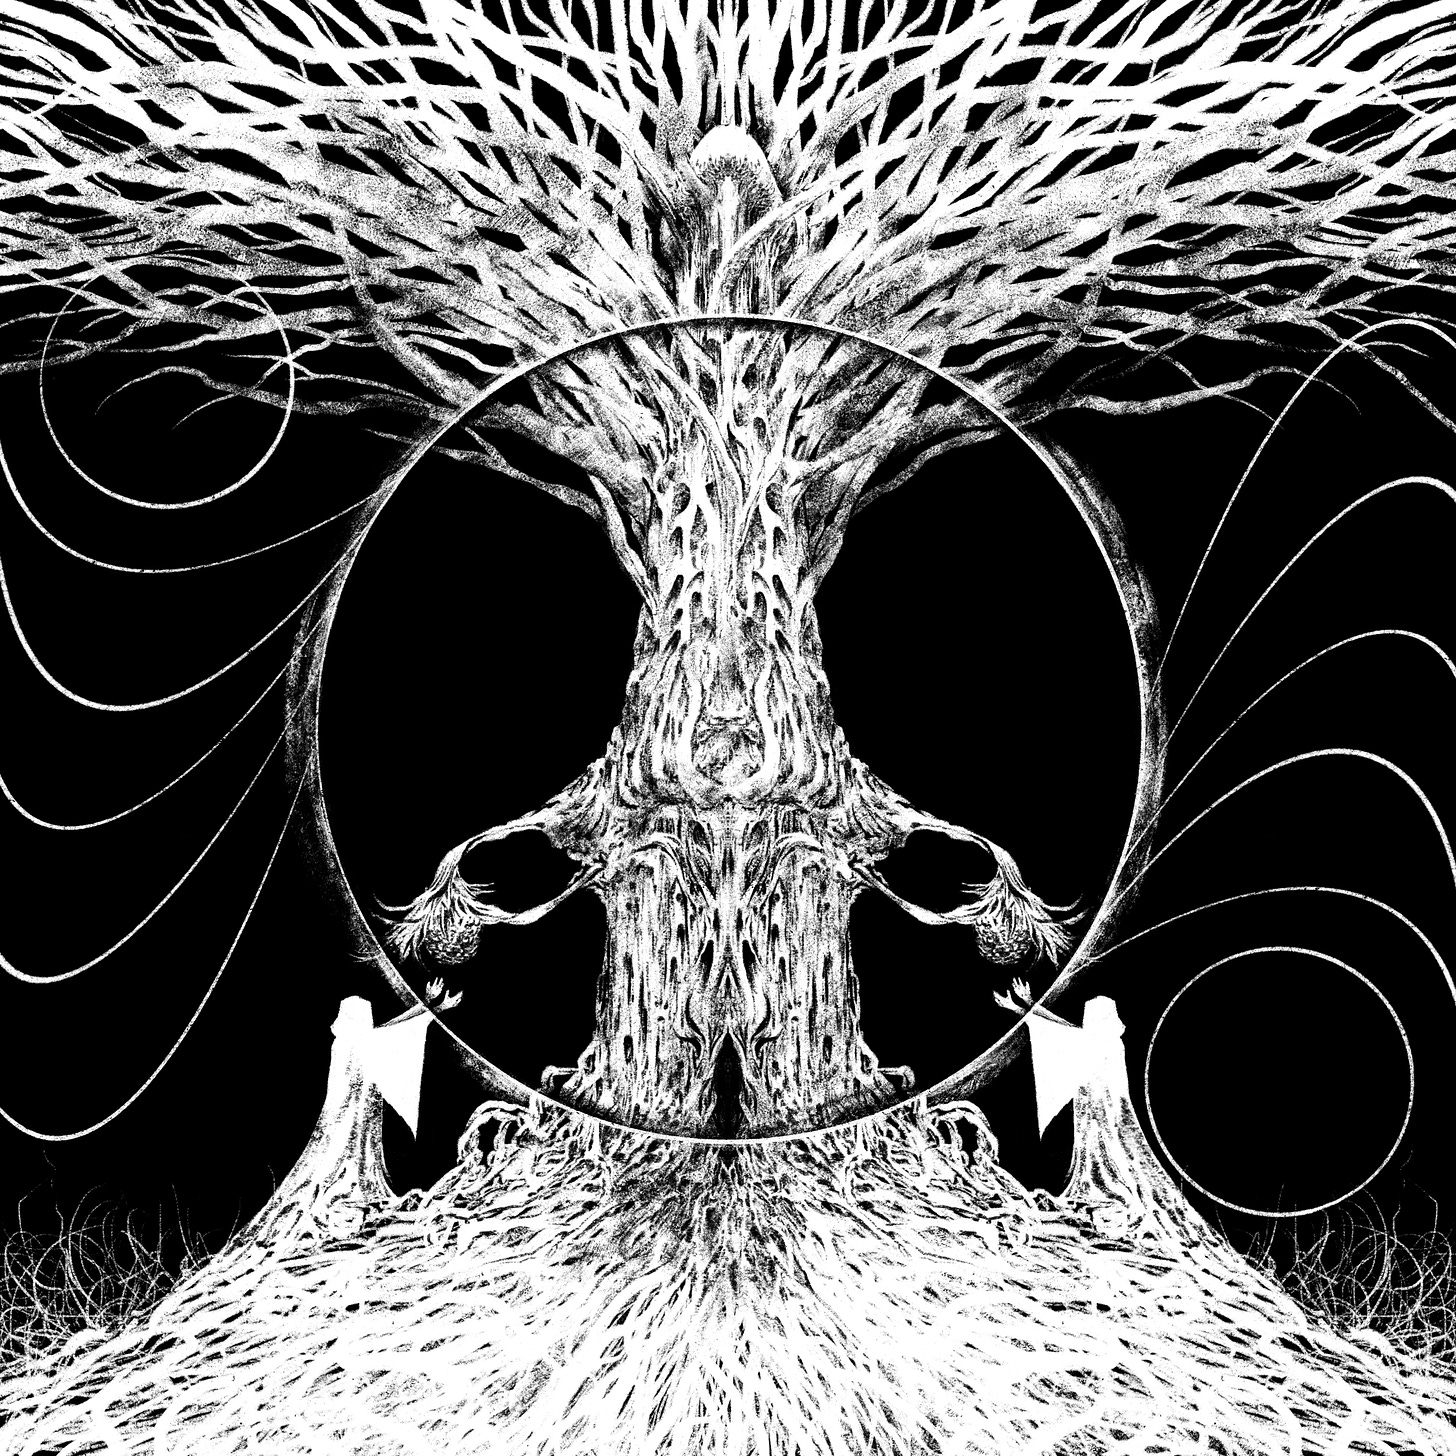 A black-and-white image of Stormgyre the Whorled one, an ancient tree, bequeathing secrets to two acolytes.